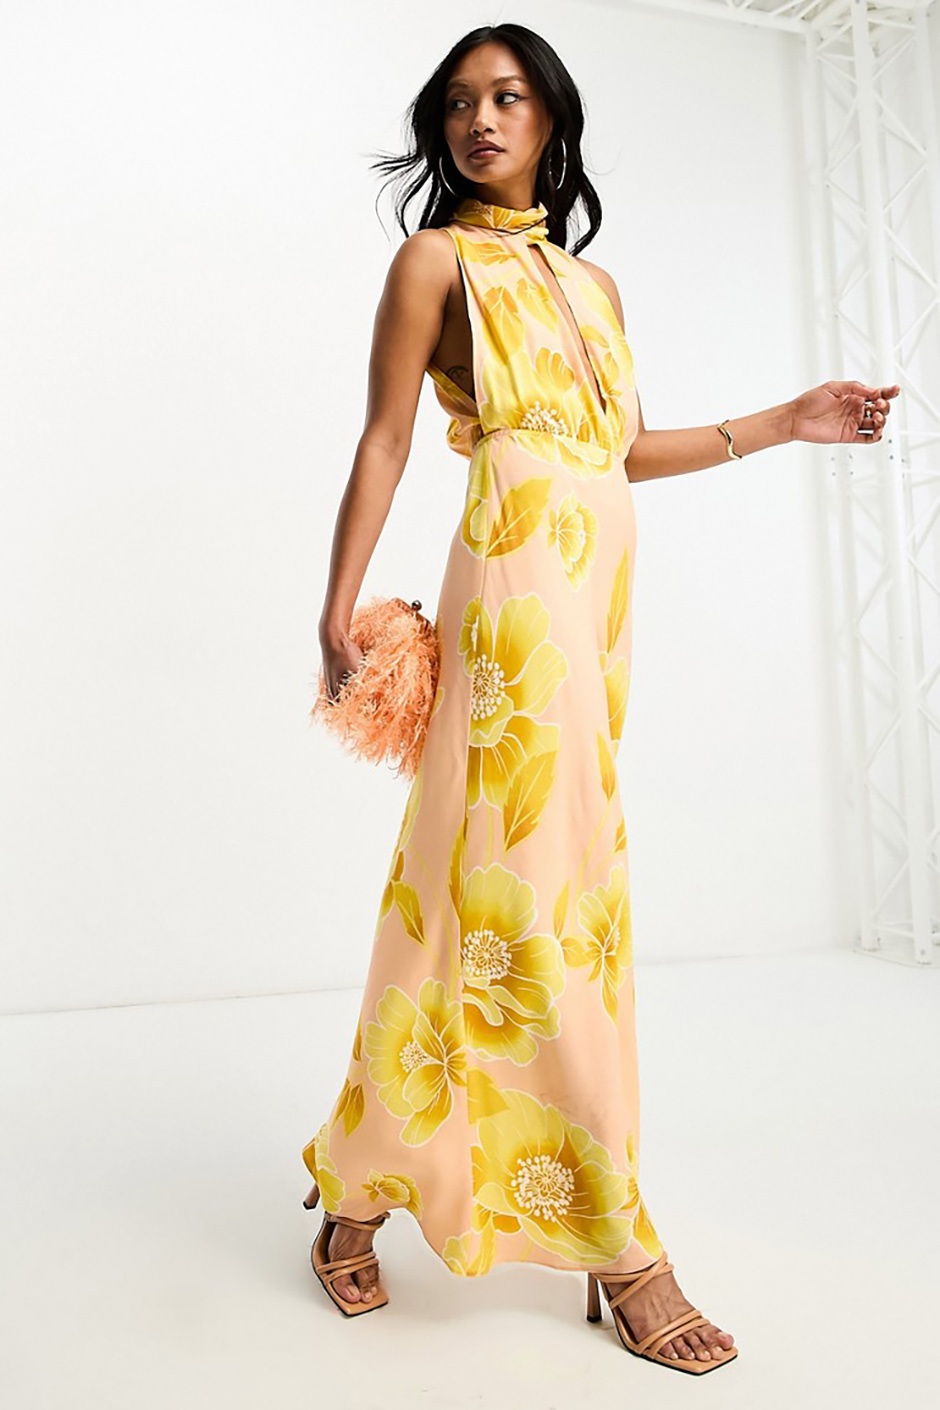 Beach wedding guest dress from Asos with halter neckline and yellow floral print